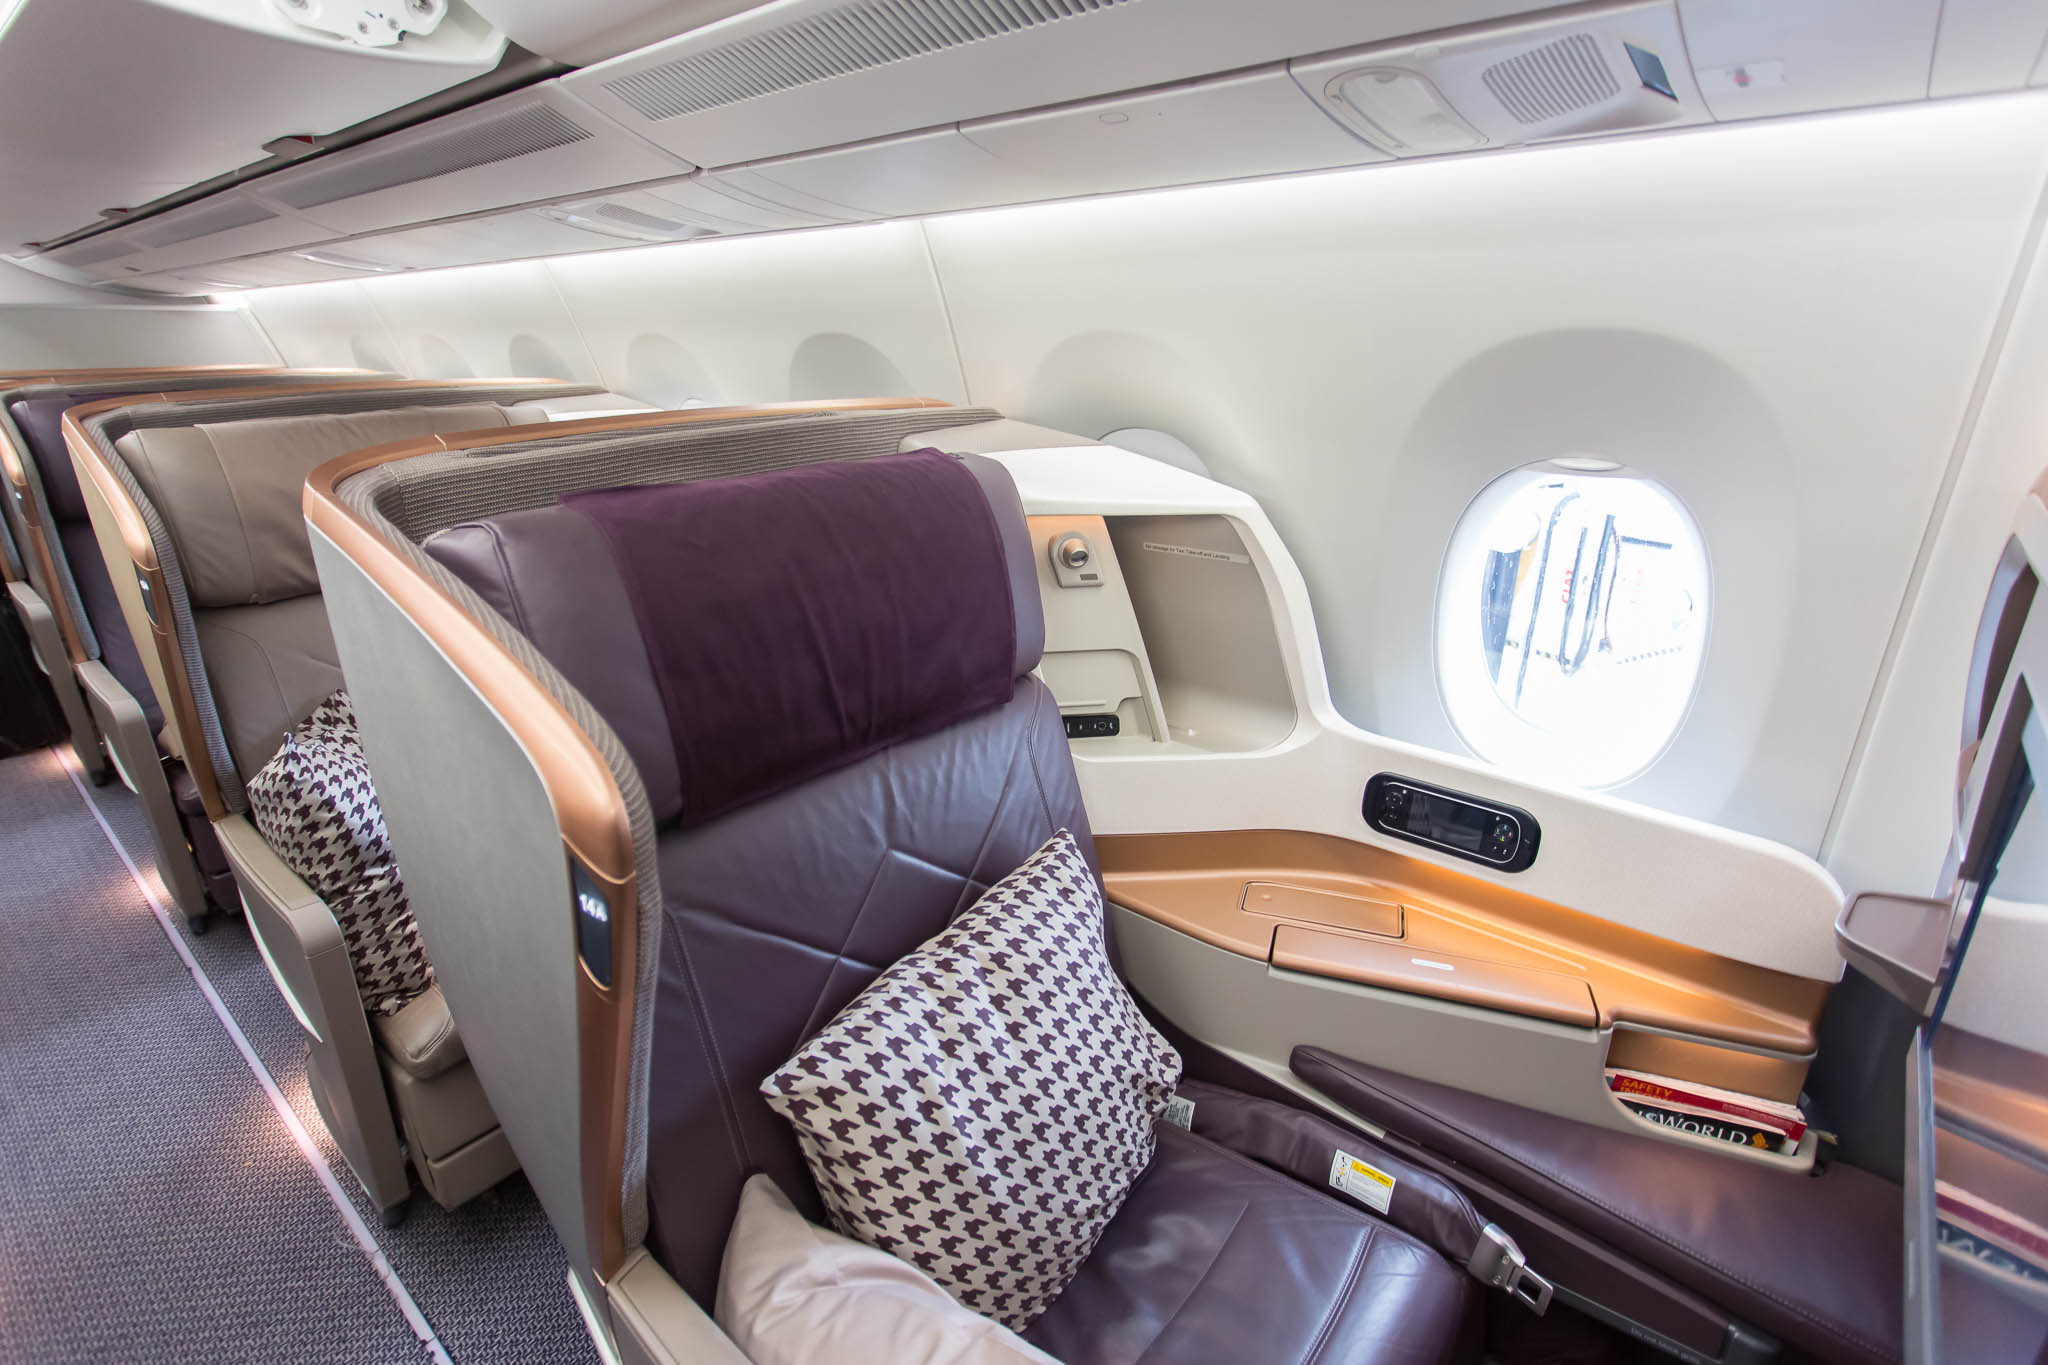 Coming Up - Singapore Airlines A350 Business Class, British Airways First.